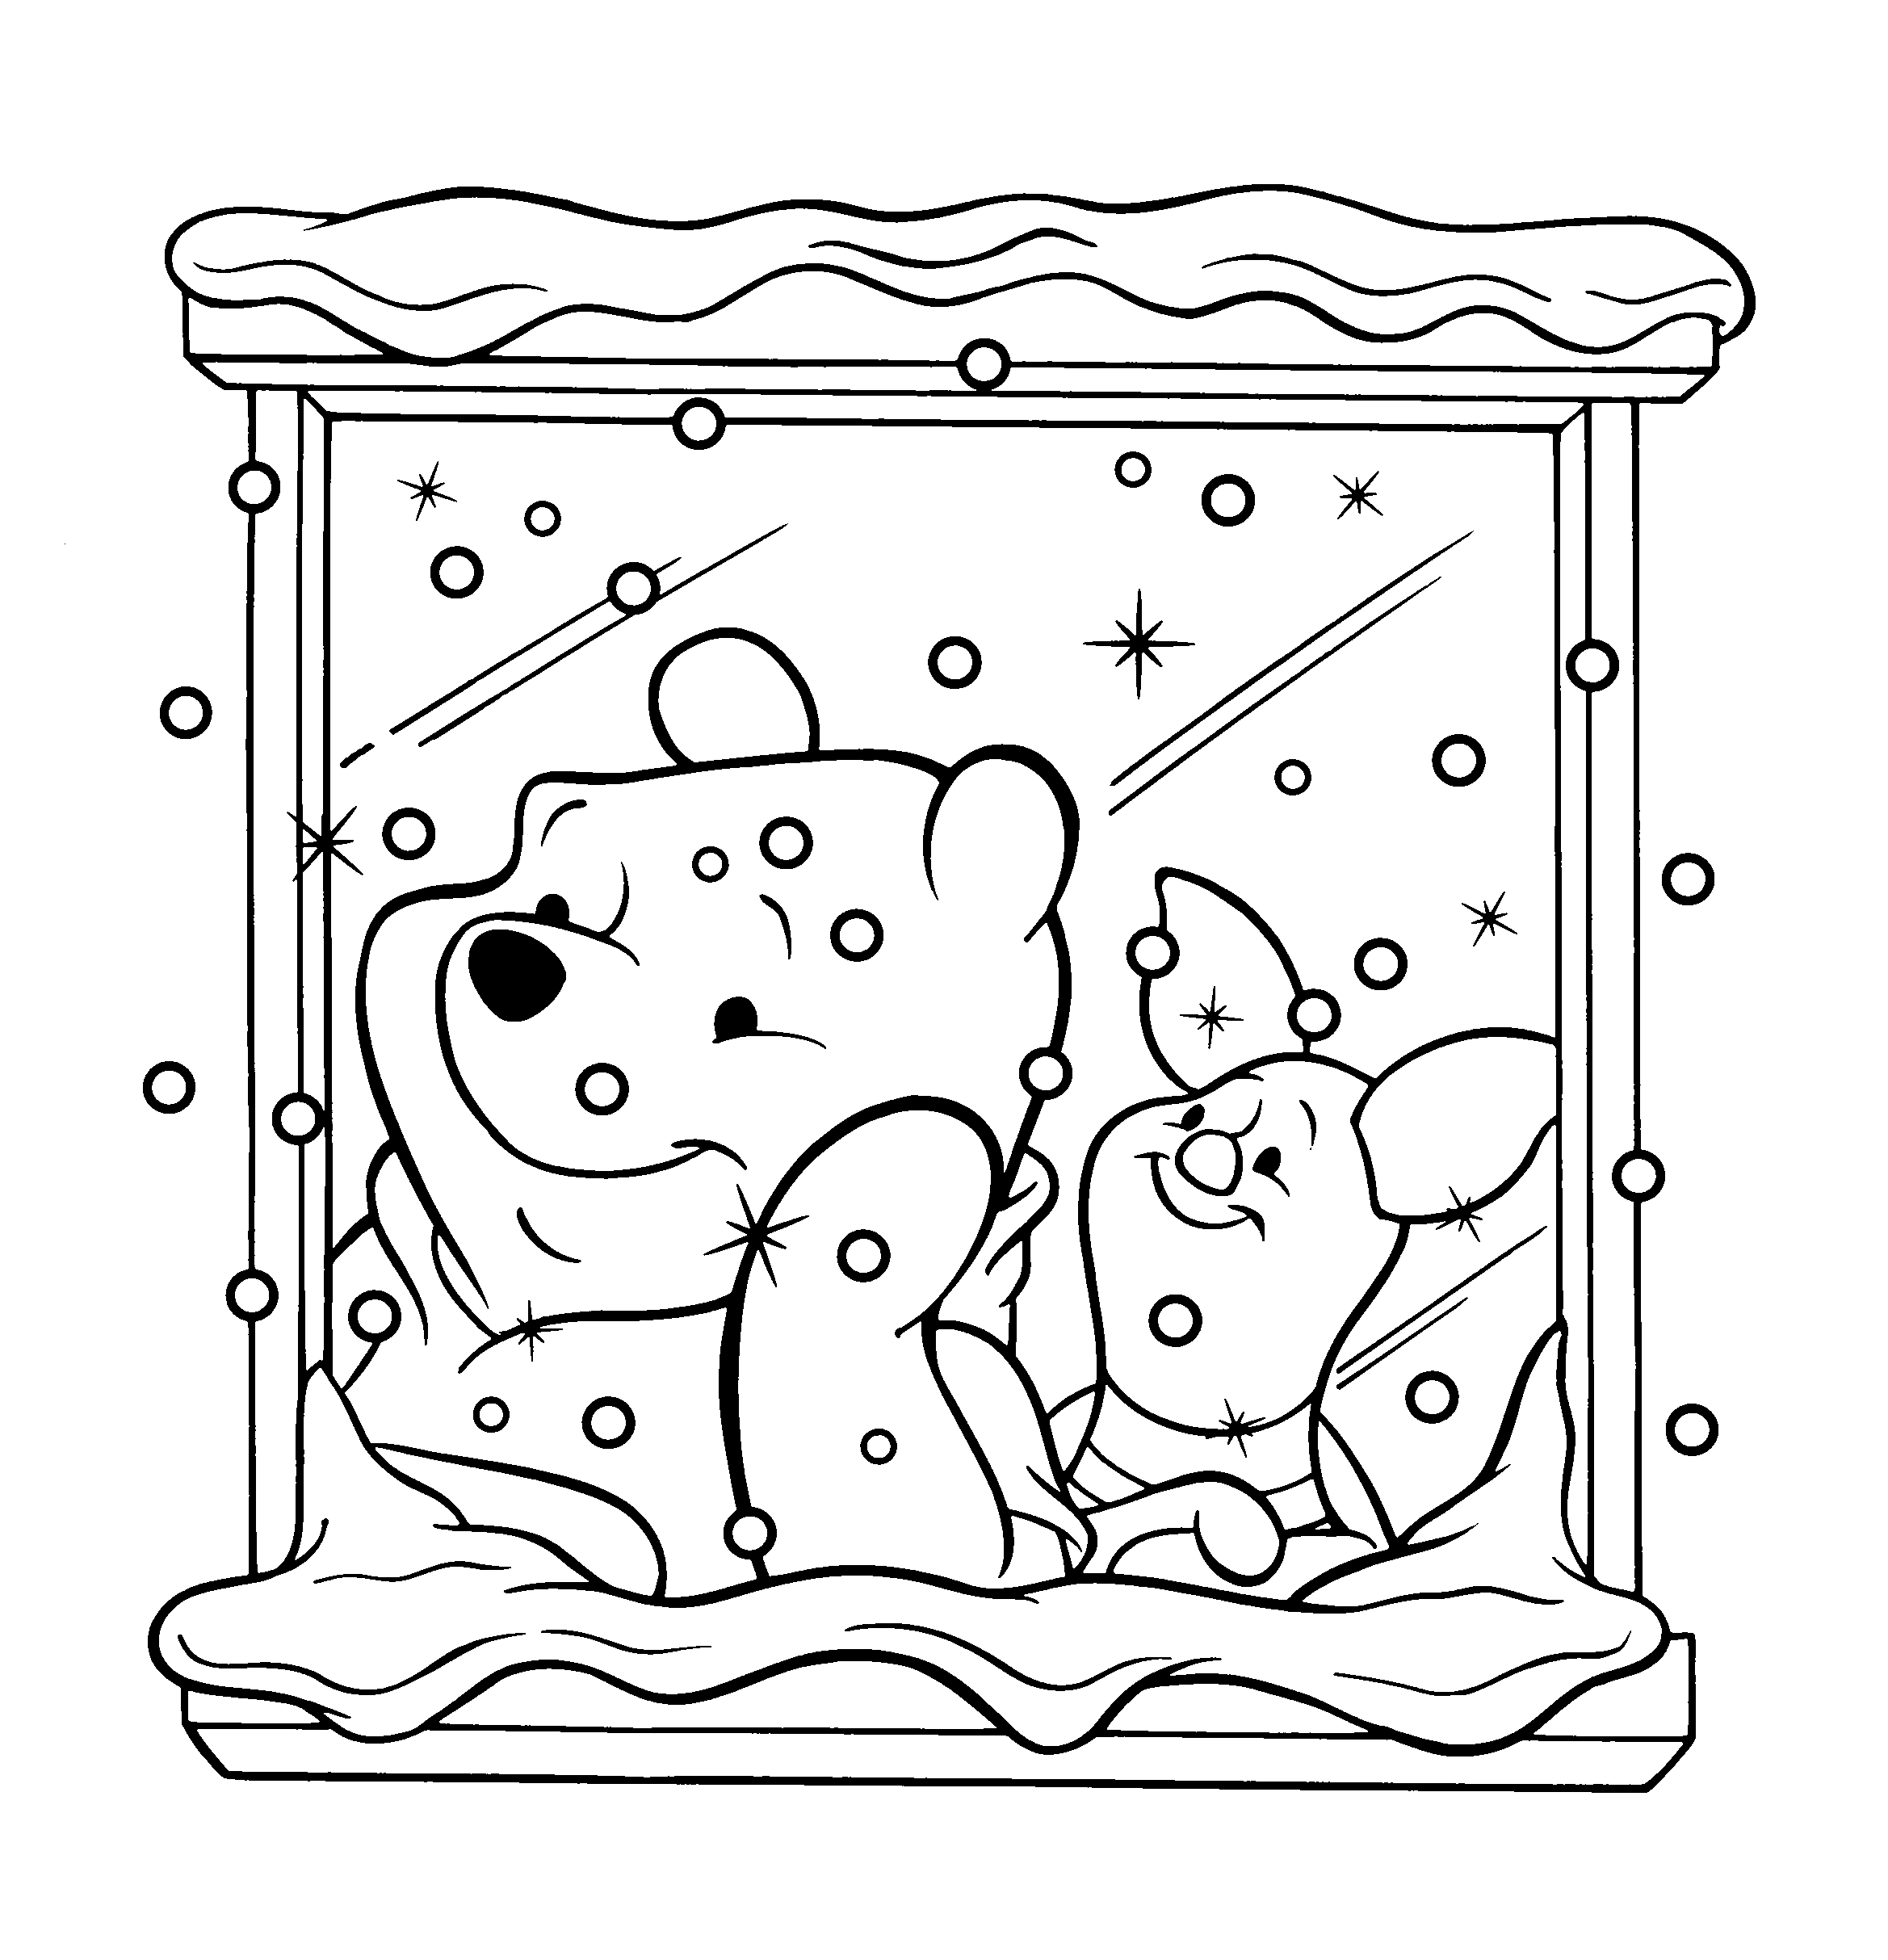 Winnie the Pooh Coloring Pages Cartoons Pooh and Piglet Printable 2020 6976 Coloring4free